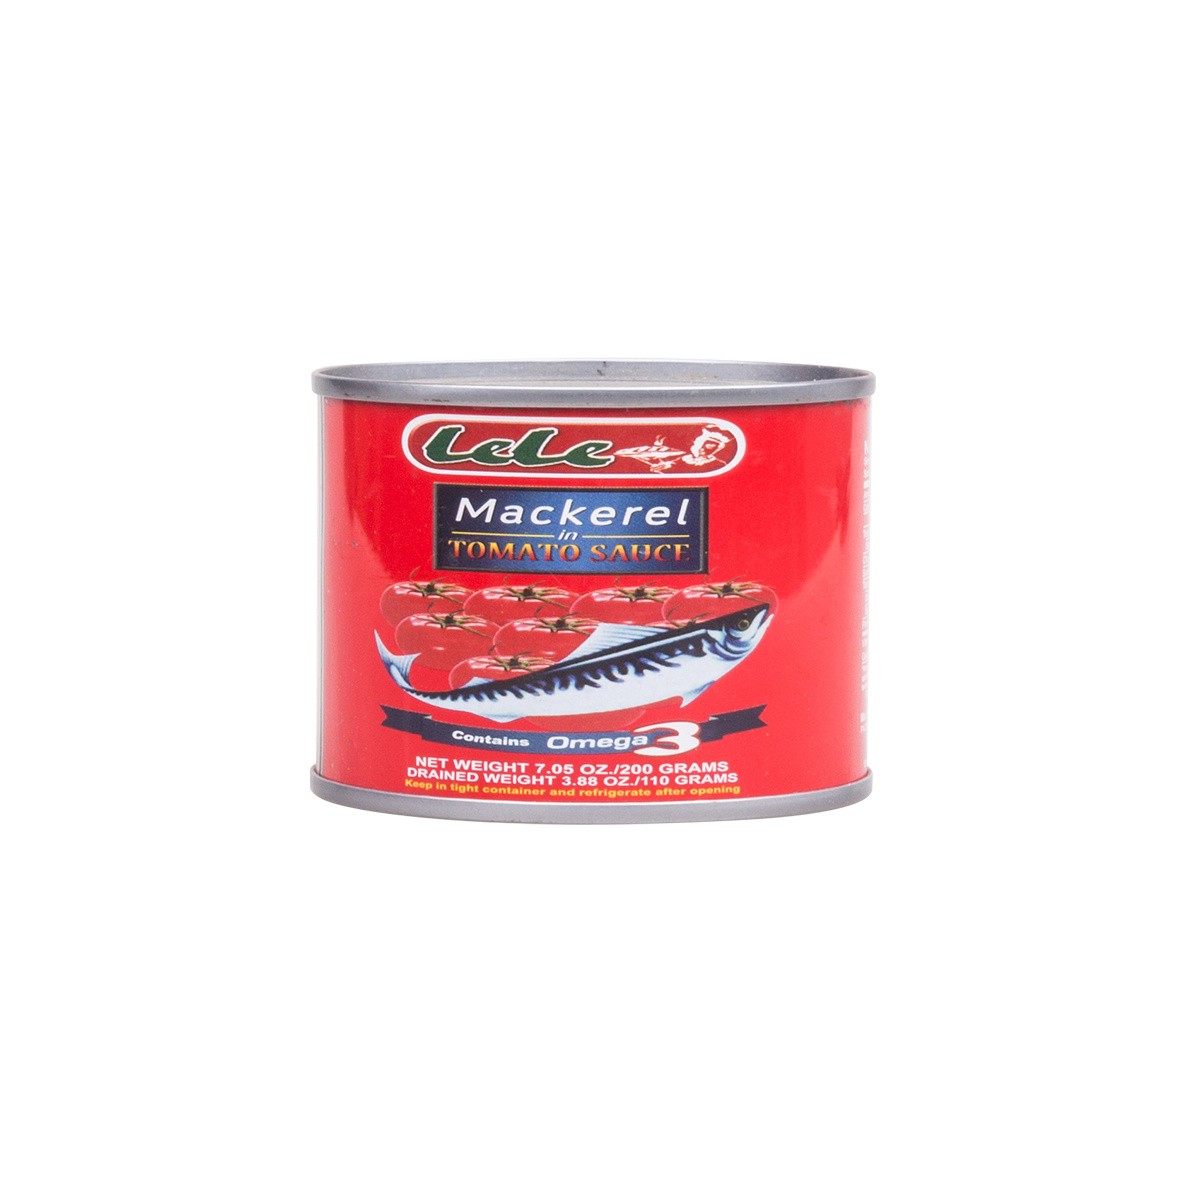 Canned Jack Mackerel in Tomato Sauce